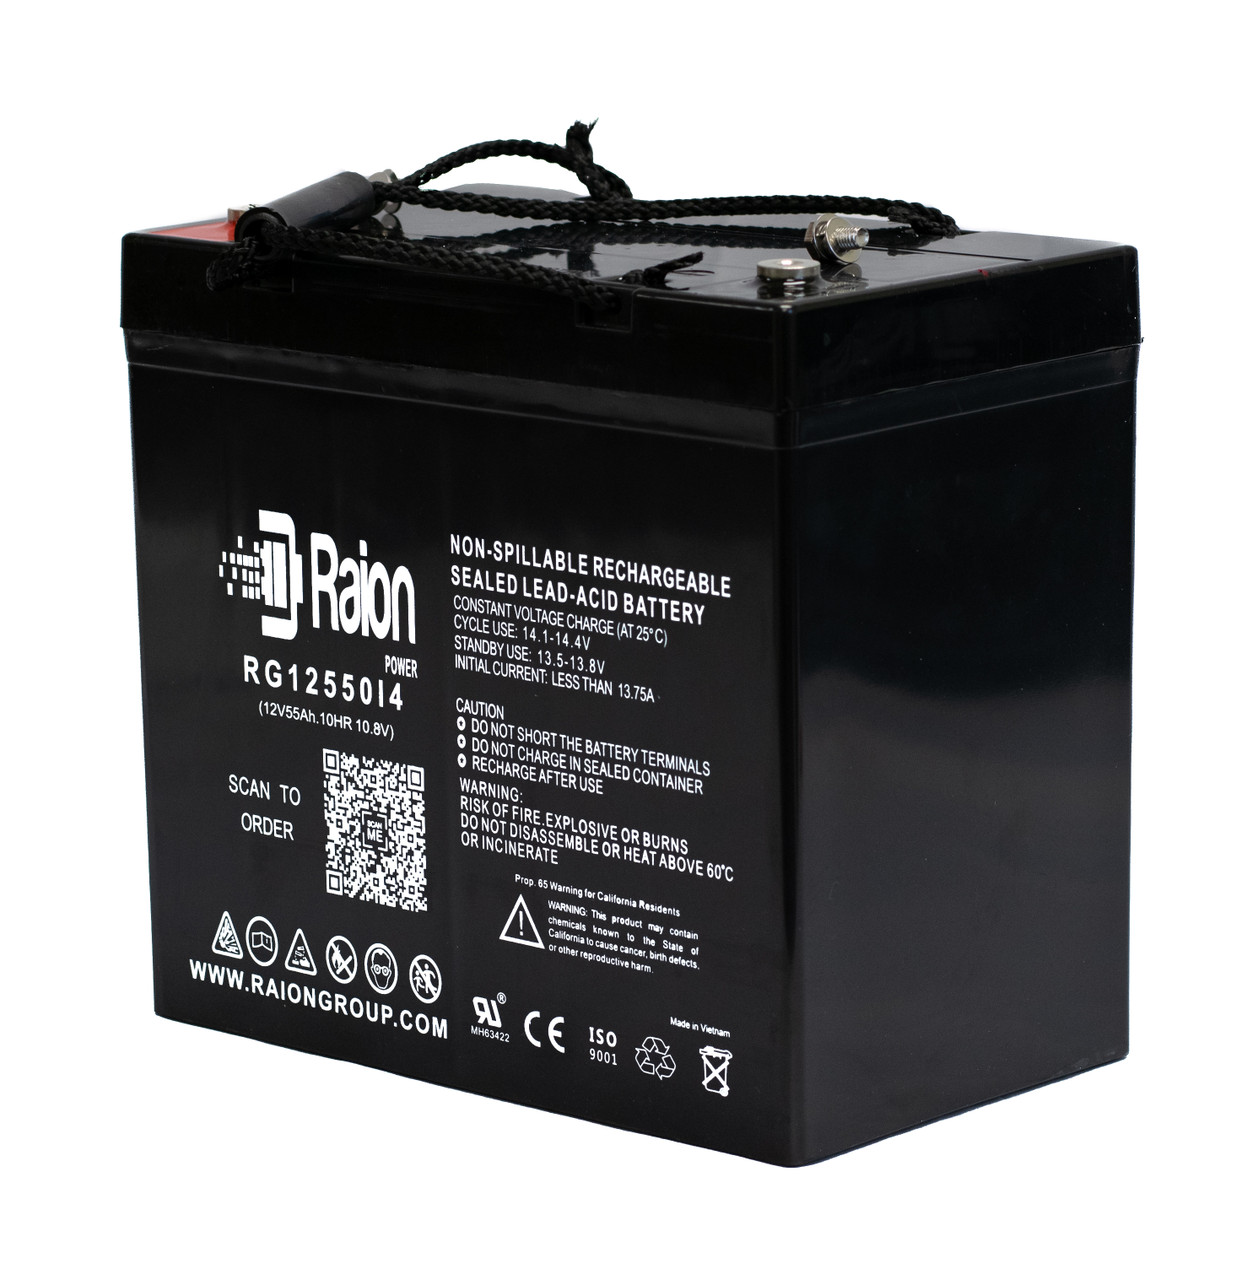 Raion Power Replacement 12V 55Ah Battery for Starlight SB12-55 - 1 Pack